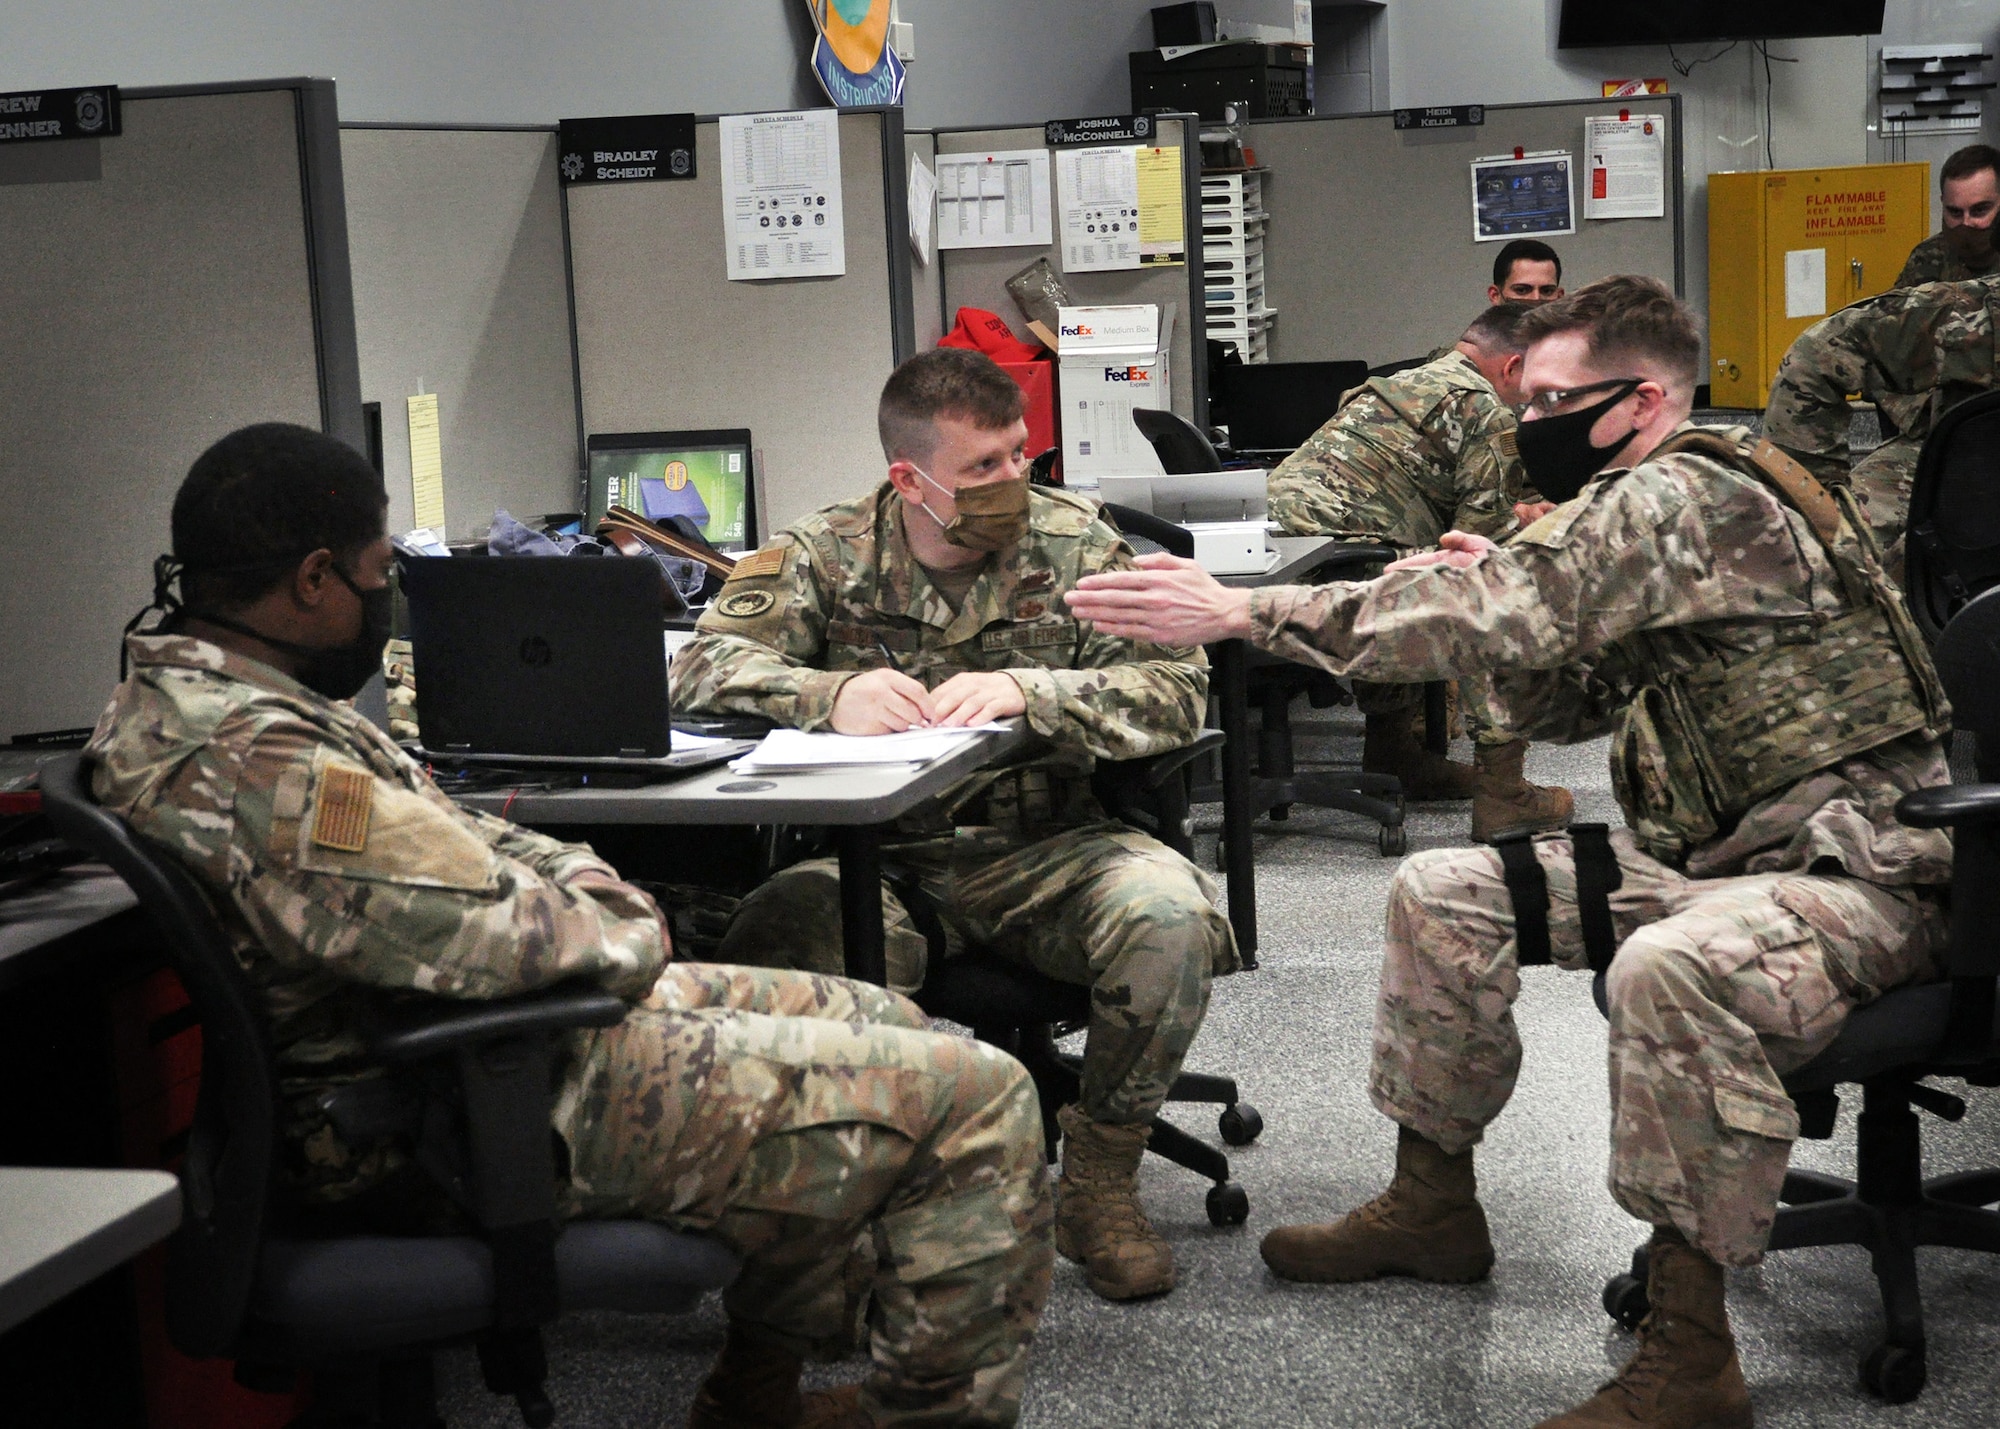 (left to right) Members of the 445th Security Forces Squadron, Staff Sgt. Daryn Weatherspoon, unit training instructor; Tech. Sgt. Jacob McCorkle, lead unit trainer; and Staff Sgt. Mitchiner Underhill, fire team member, perform a tabletop evaluation to test Airman’s knowledge of cover and concealment, flanking procedures and moving as a firing team, June 6, 2020.  Discussions like these are now completed in small groups to comply with social distancing guidelines.